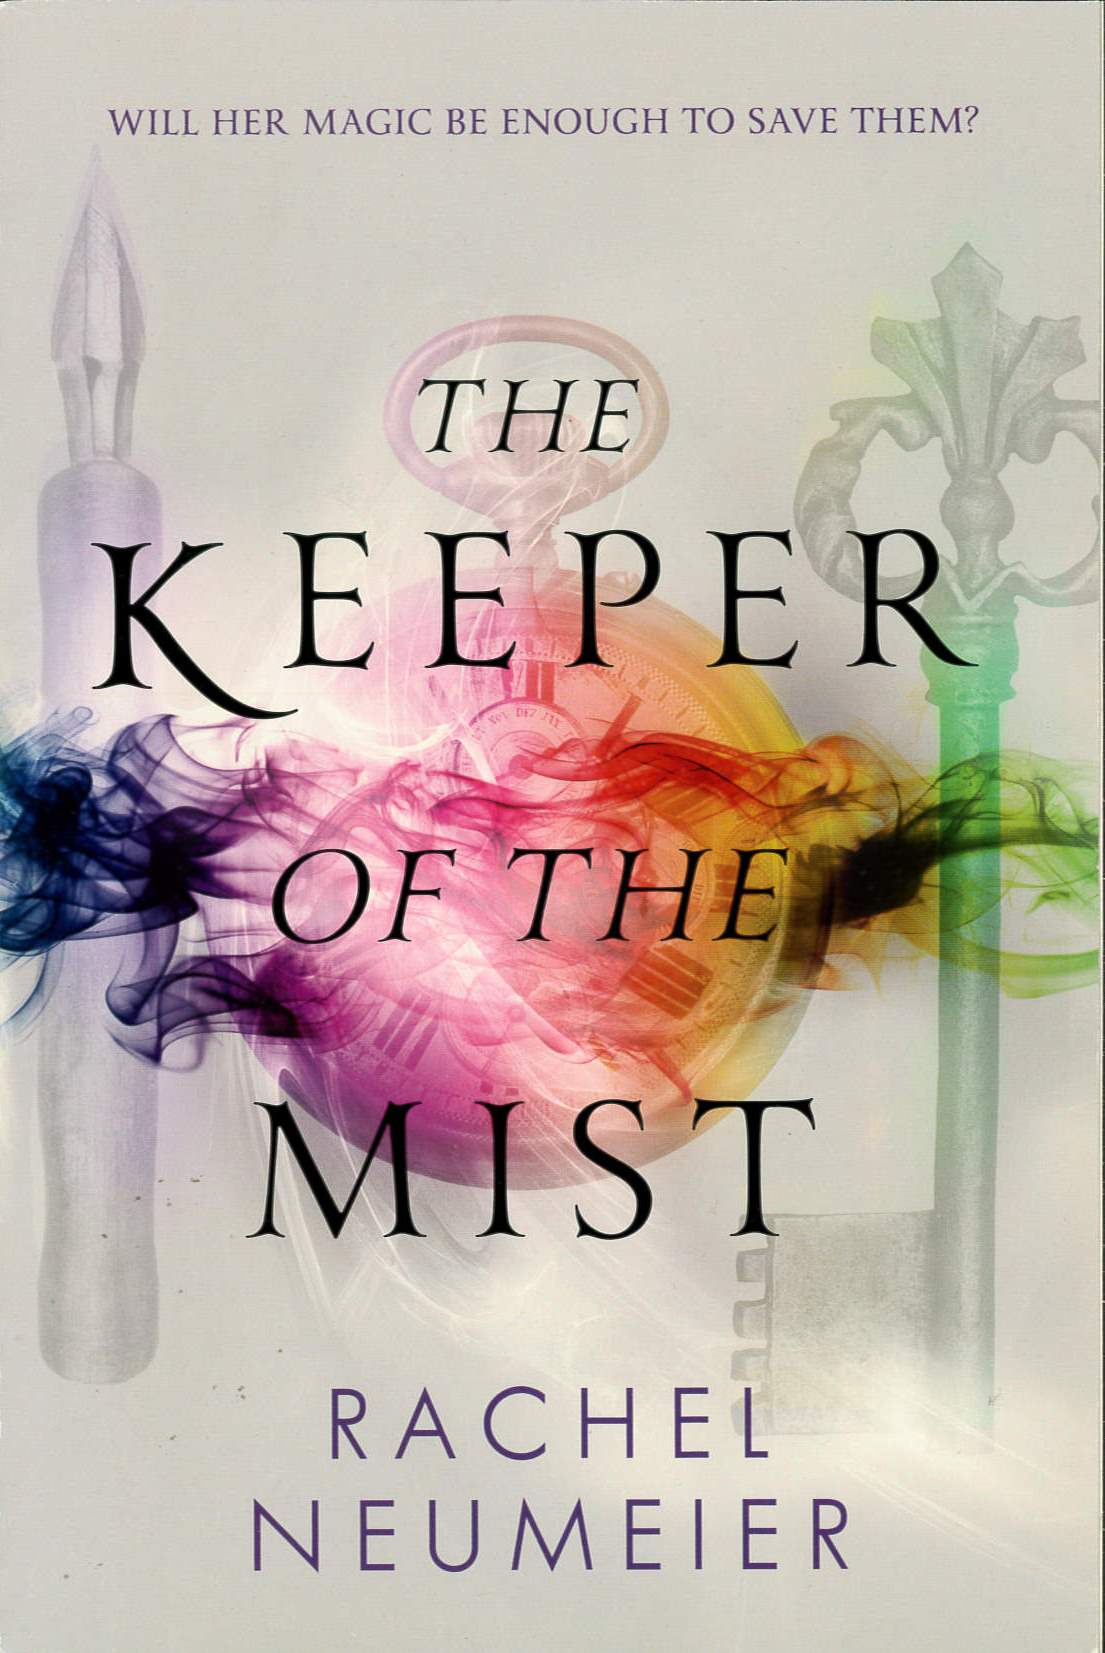 The keeper of the mist /